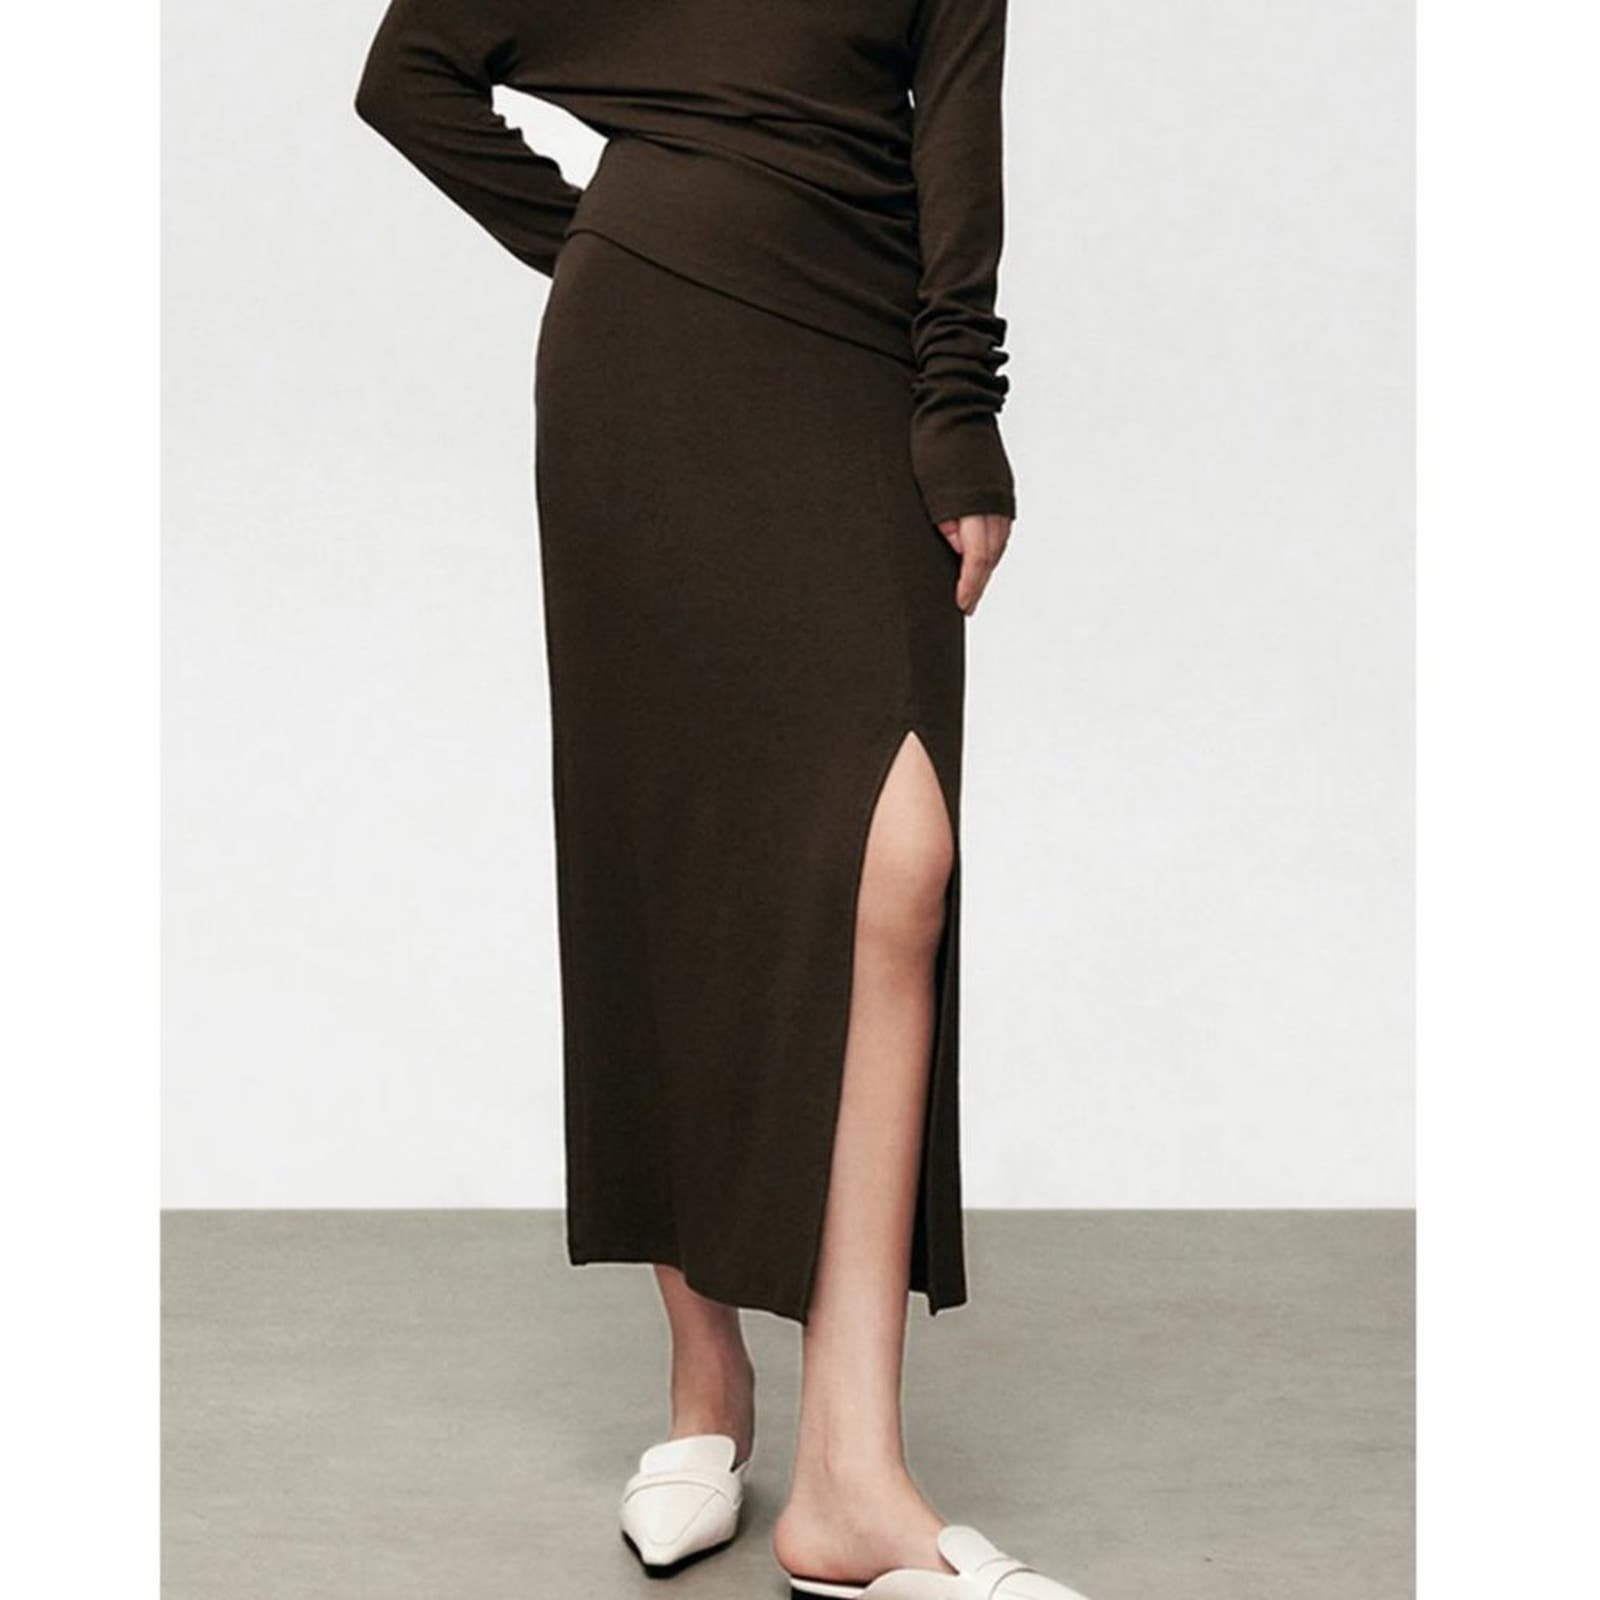 the Lowest price Commense High Waist Brown Midi Slit NWT XS Nq2ovzHqs hot sale